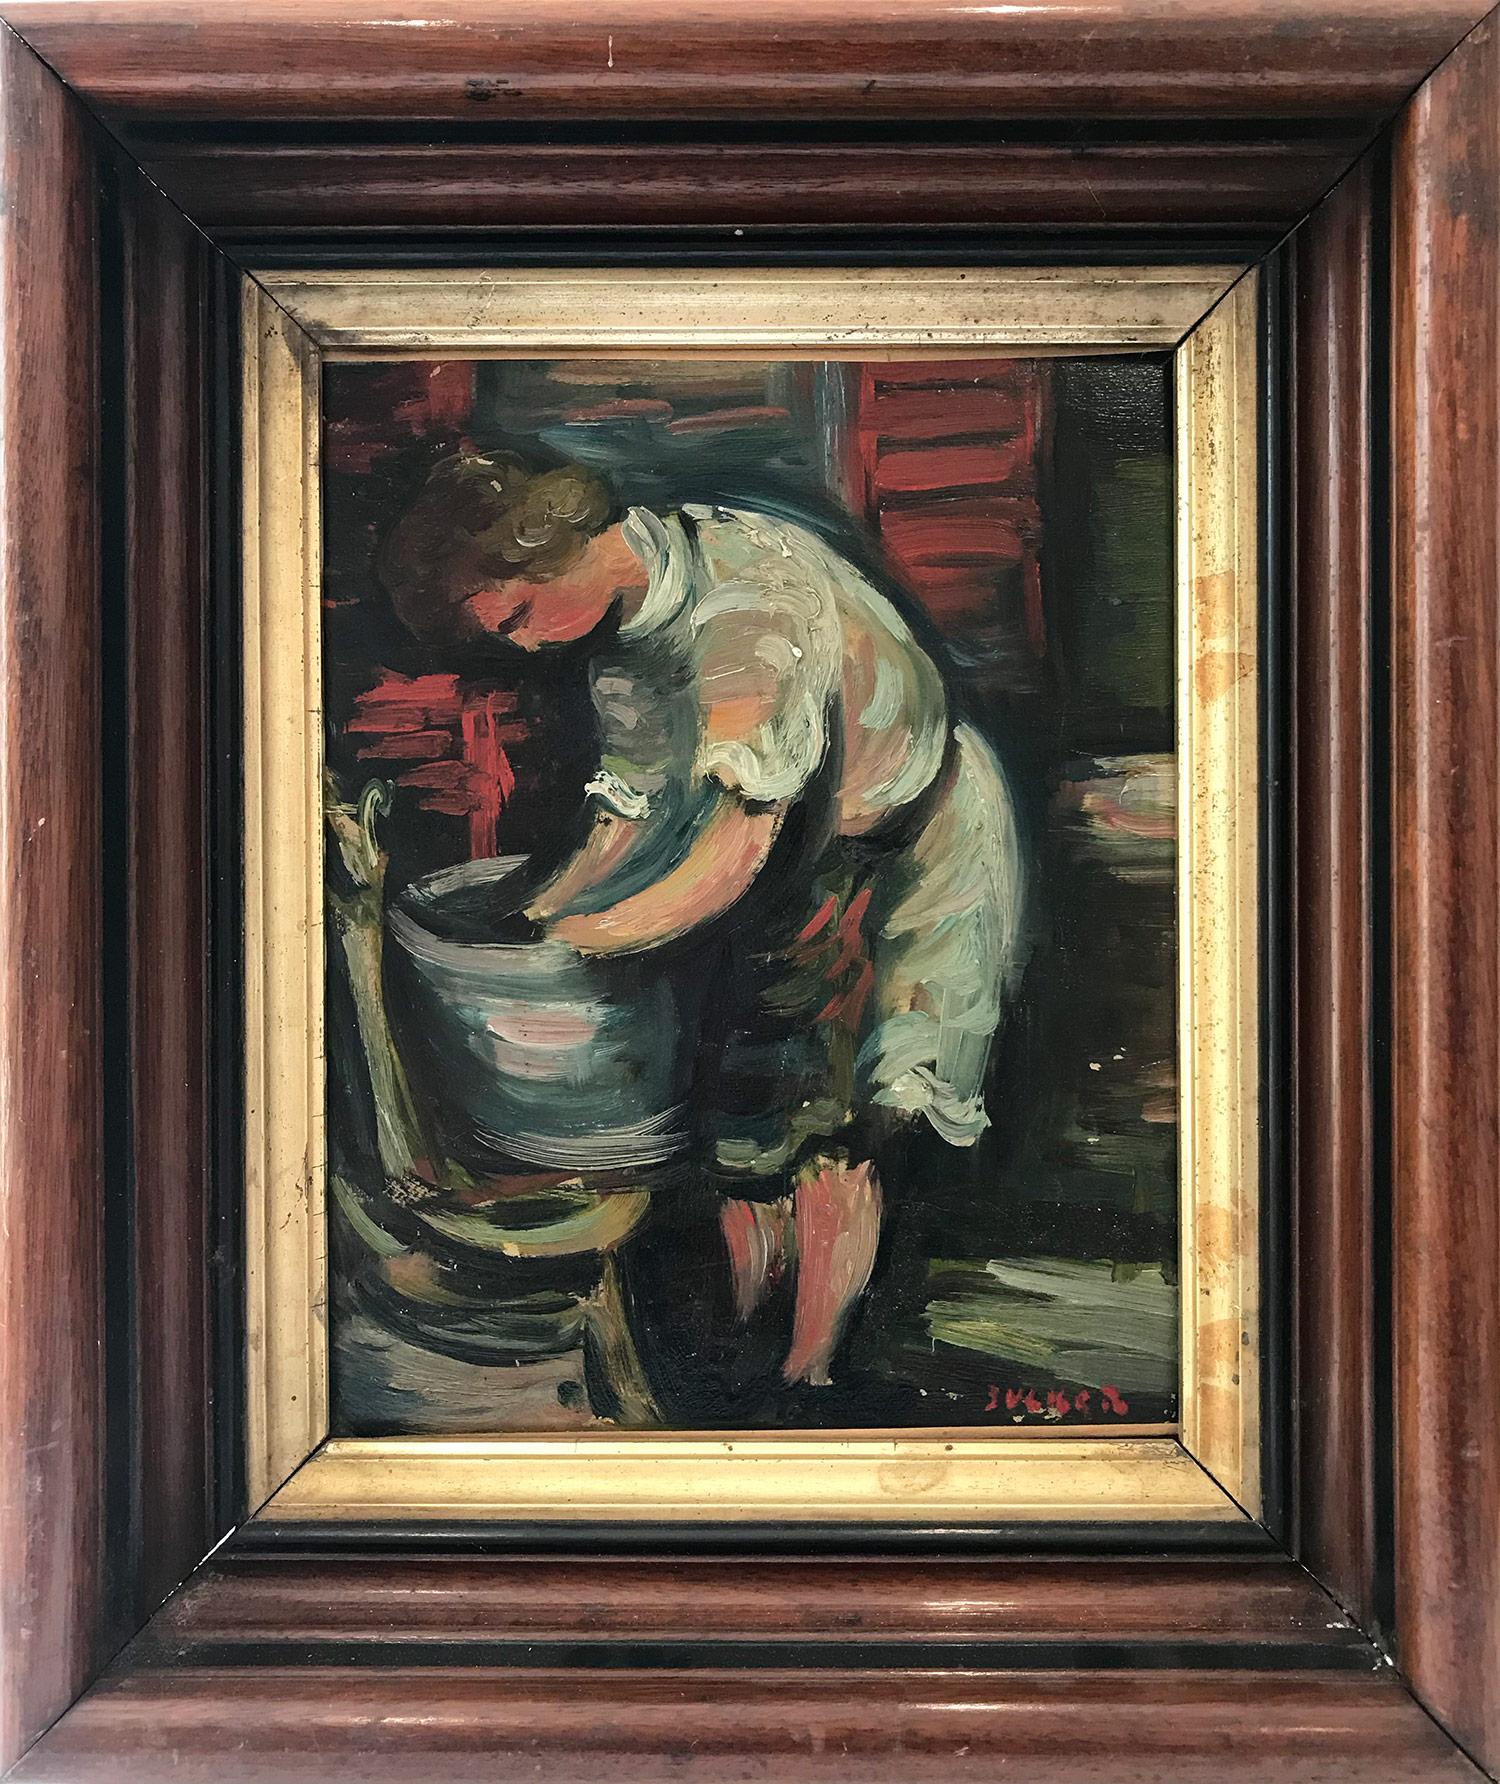 "Laundry" Post-Impressionism French Oil Painting on Canvas of Figure and Laundry